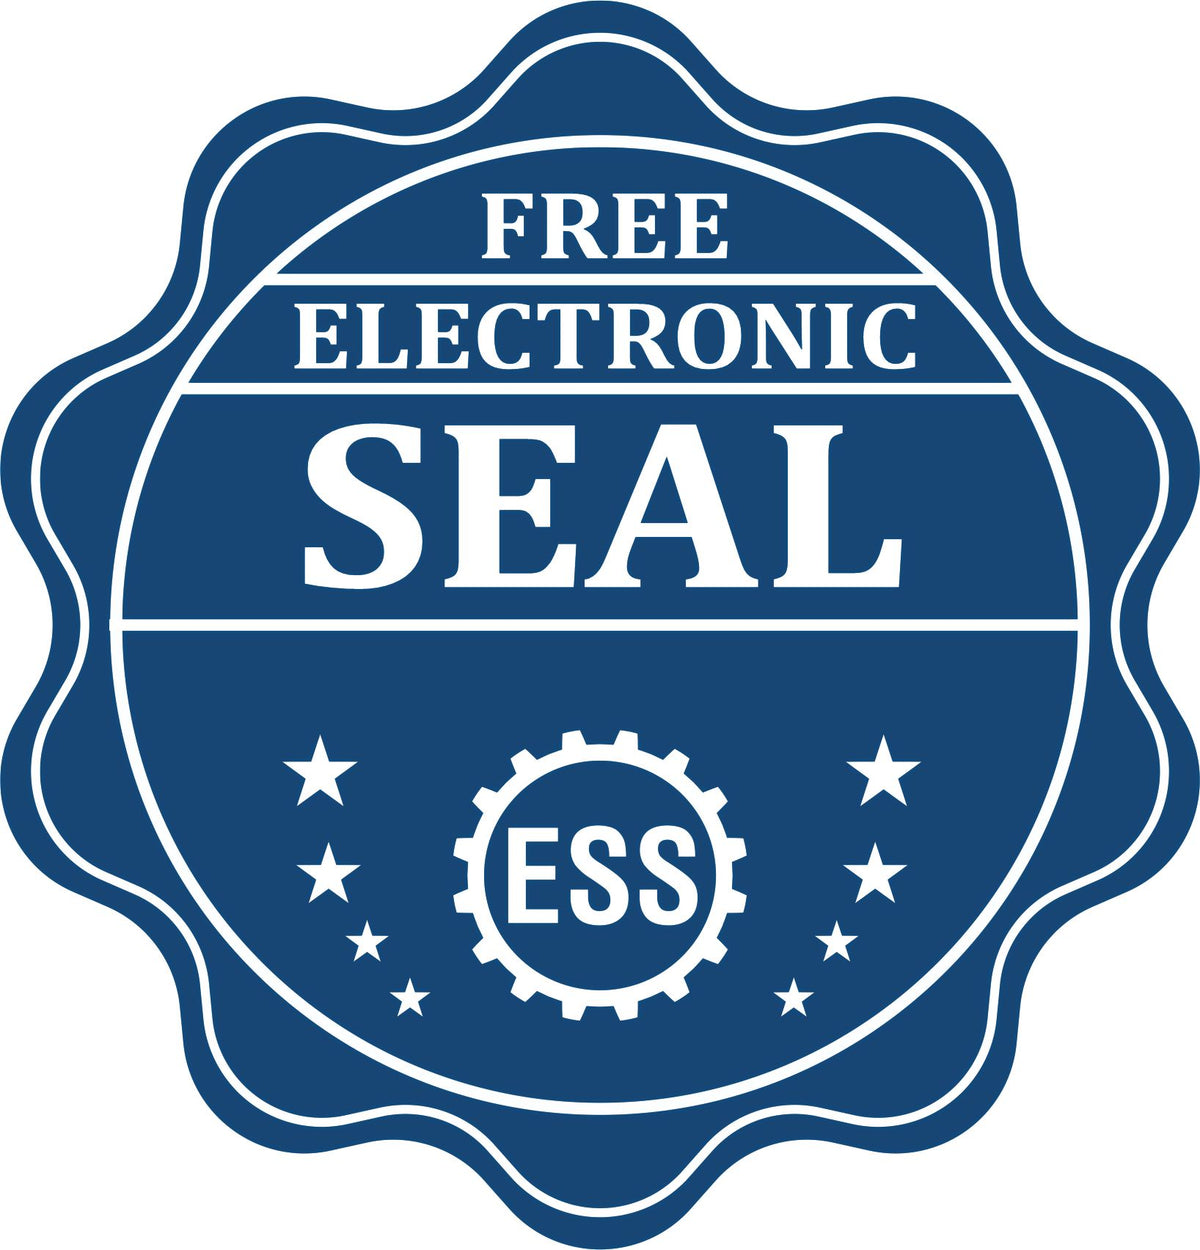 A badge showing a free electronic seal for the Gift Indiana Land Surveyor Seal with stars and the ESS gear on the emblem.